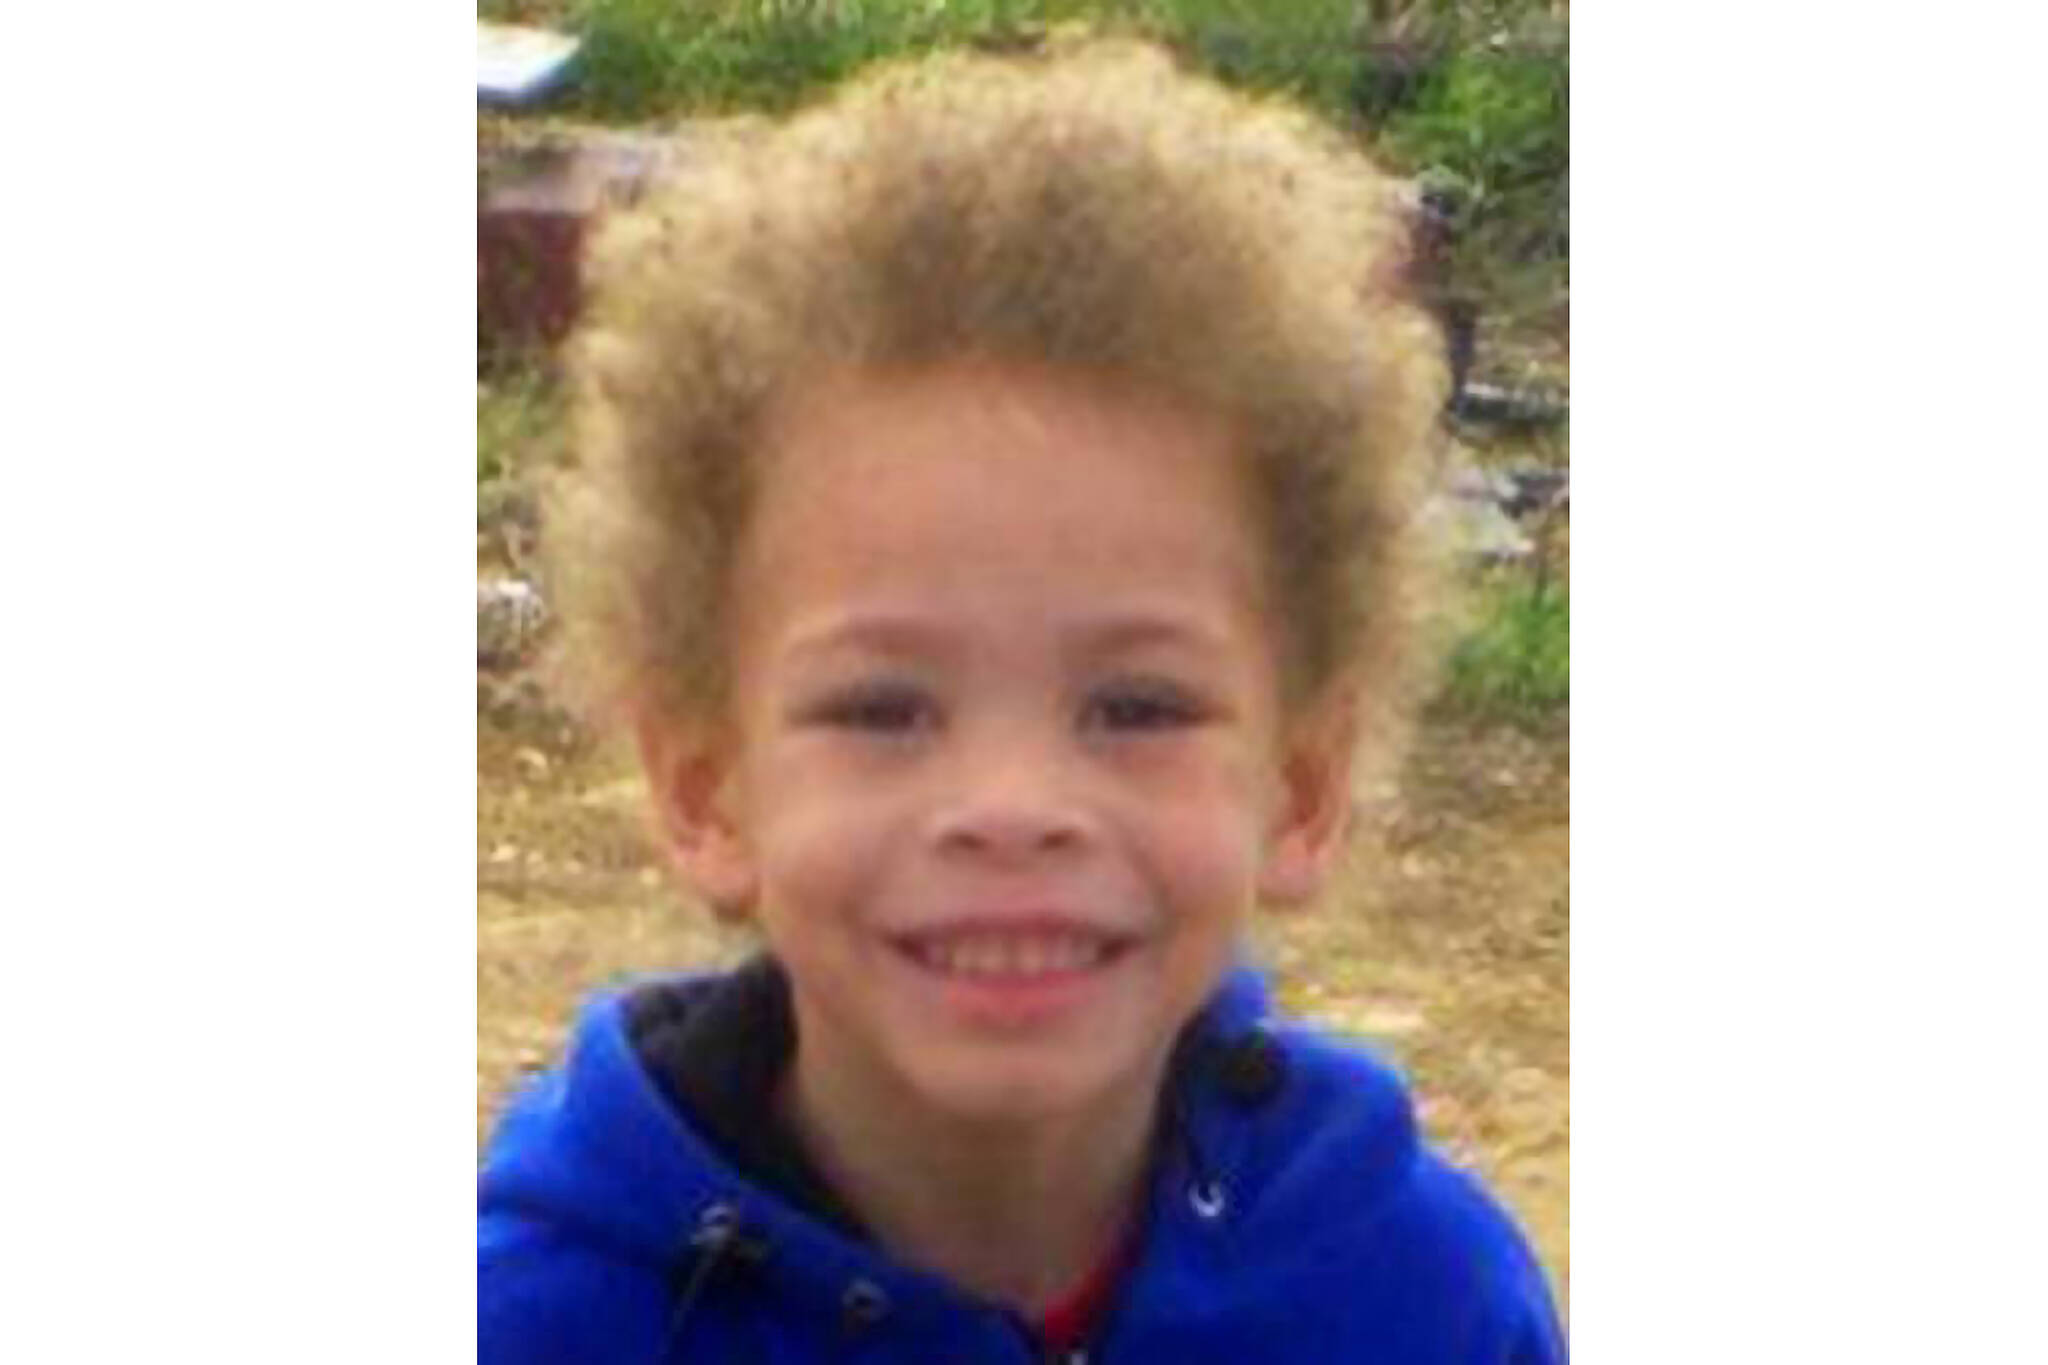 This undated photo provided by the Anchorage Police Department shows missing 6-year-old DeShawn McCormick. Police in Alaska’s largest city are reaching out to the public to see if they can provide new leads in the disappearance nine years ago of the 6-year-old boy. McCormick’s mother Jasmine said she last saw her son in the spring of 2013. (Anchorage Police Department via AP)